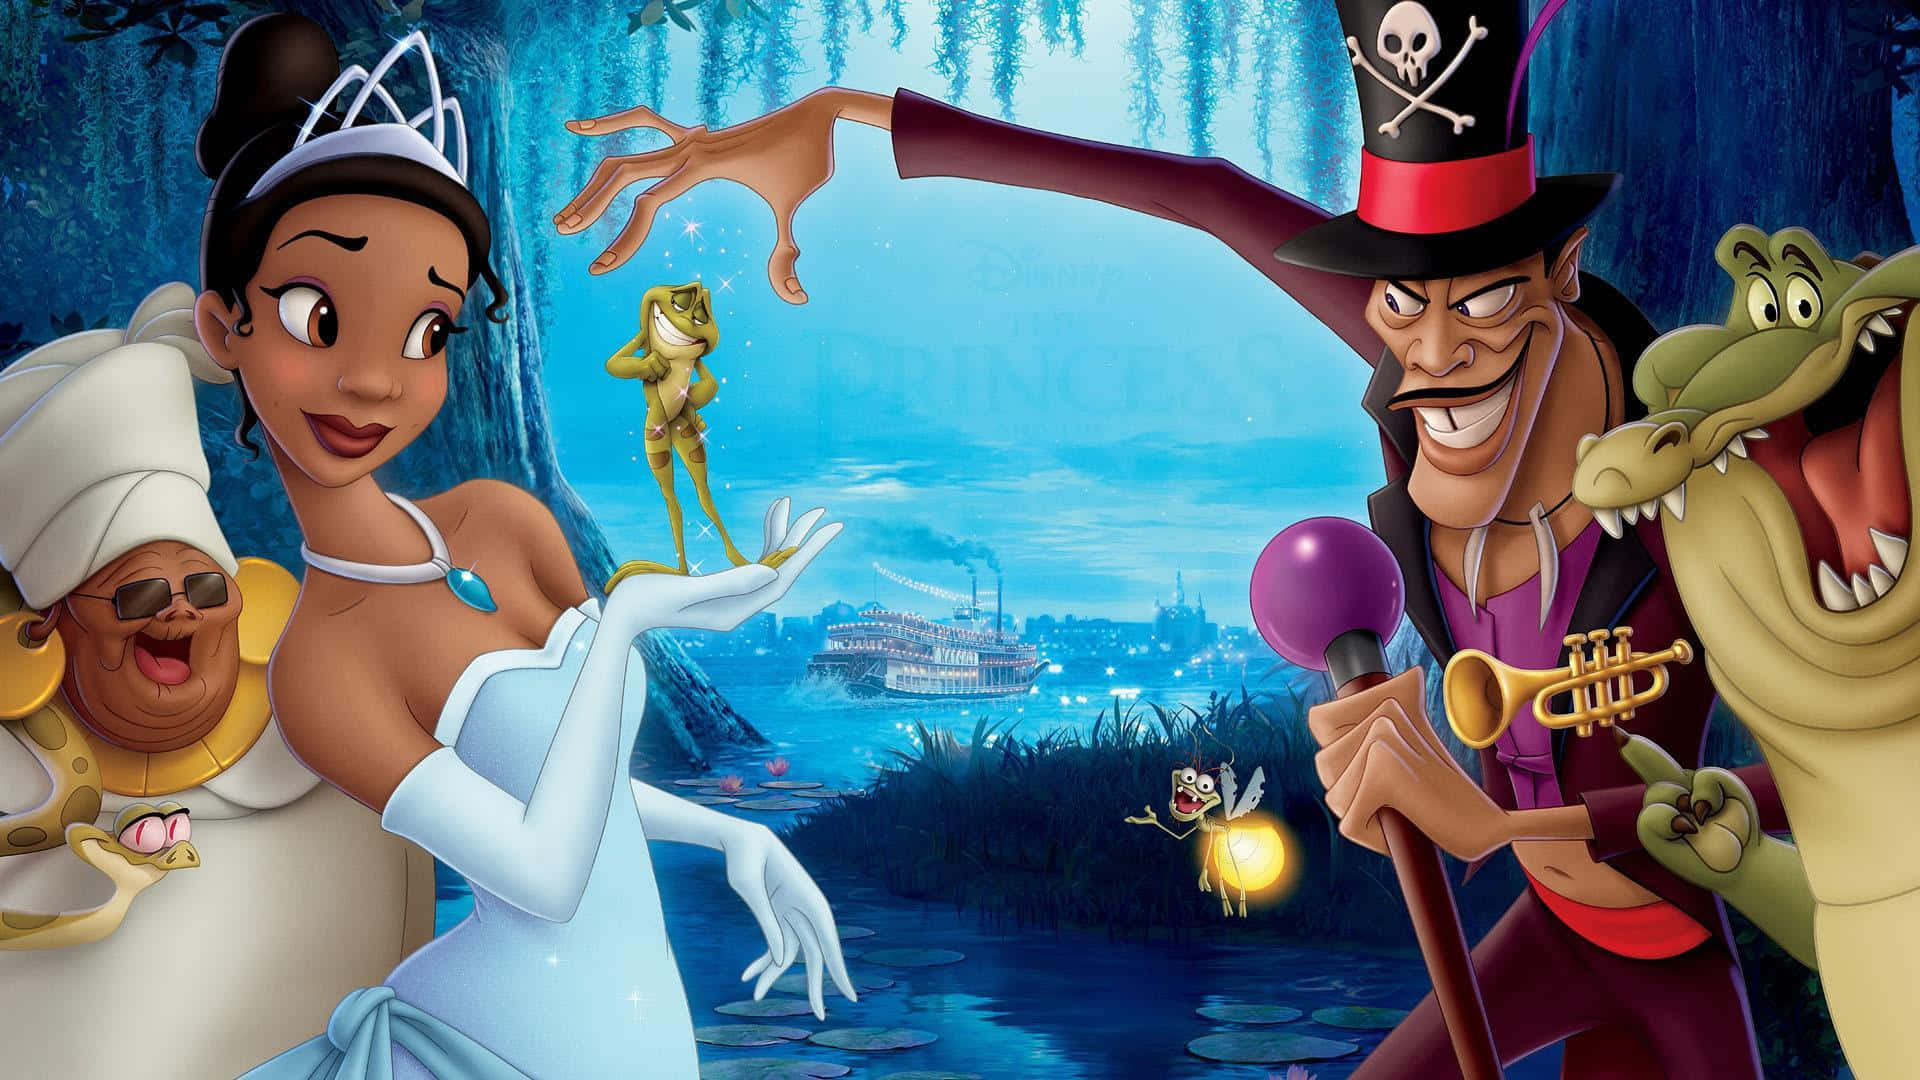 Princess Tiana With The Princess And The Frog Characters Wallpaper